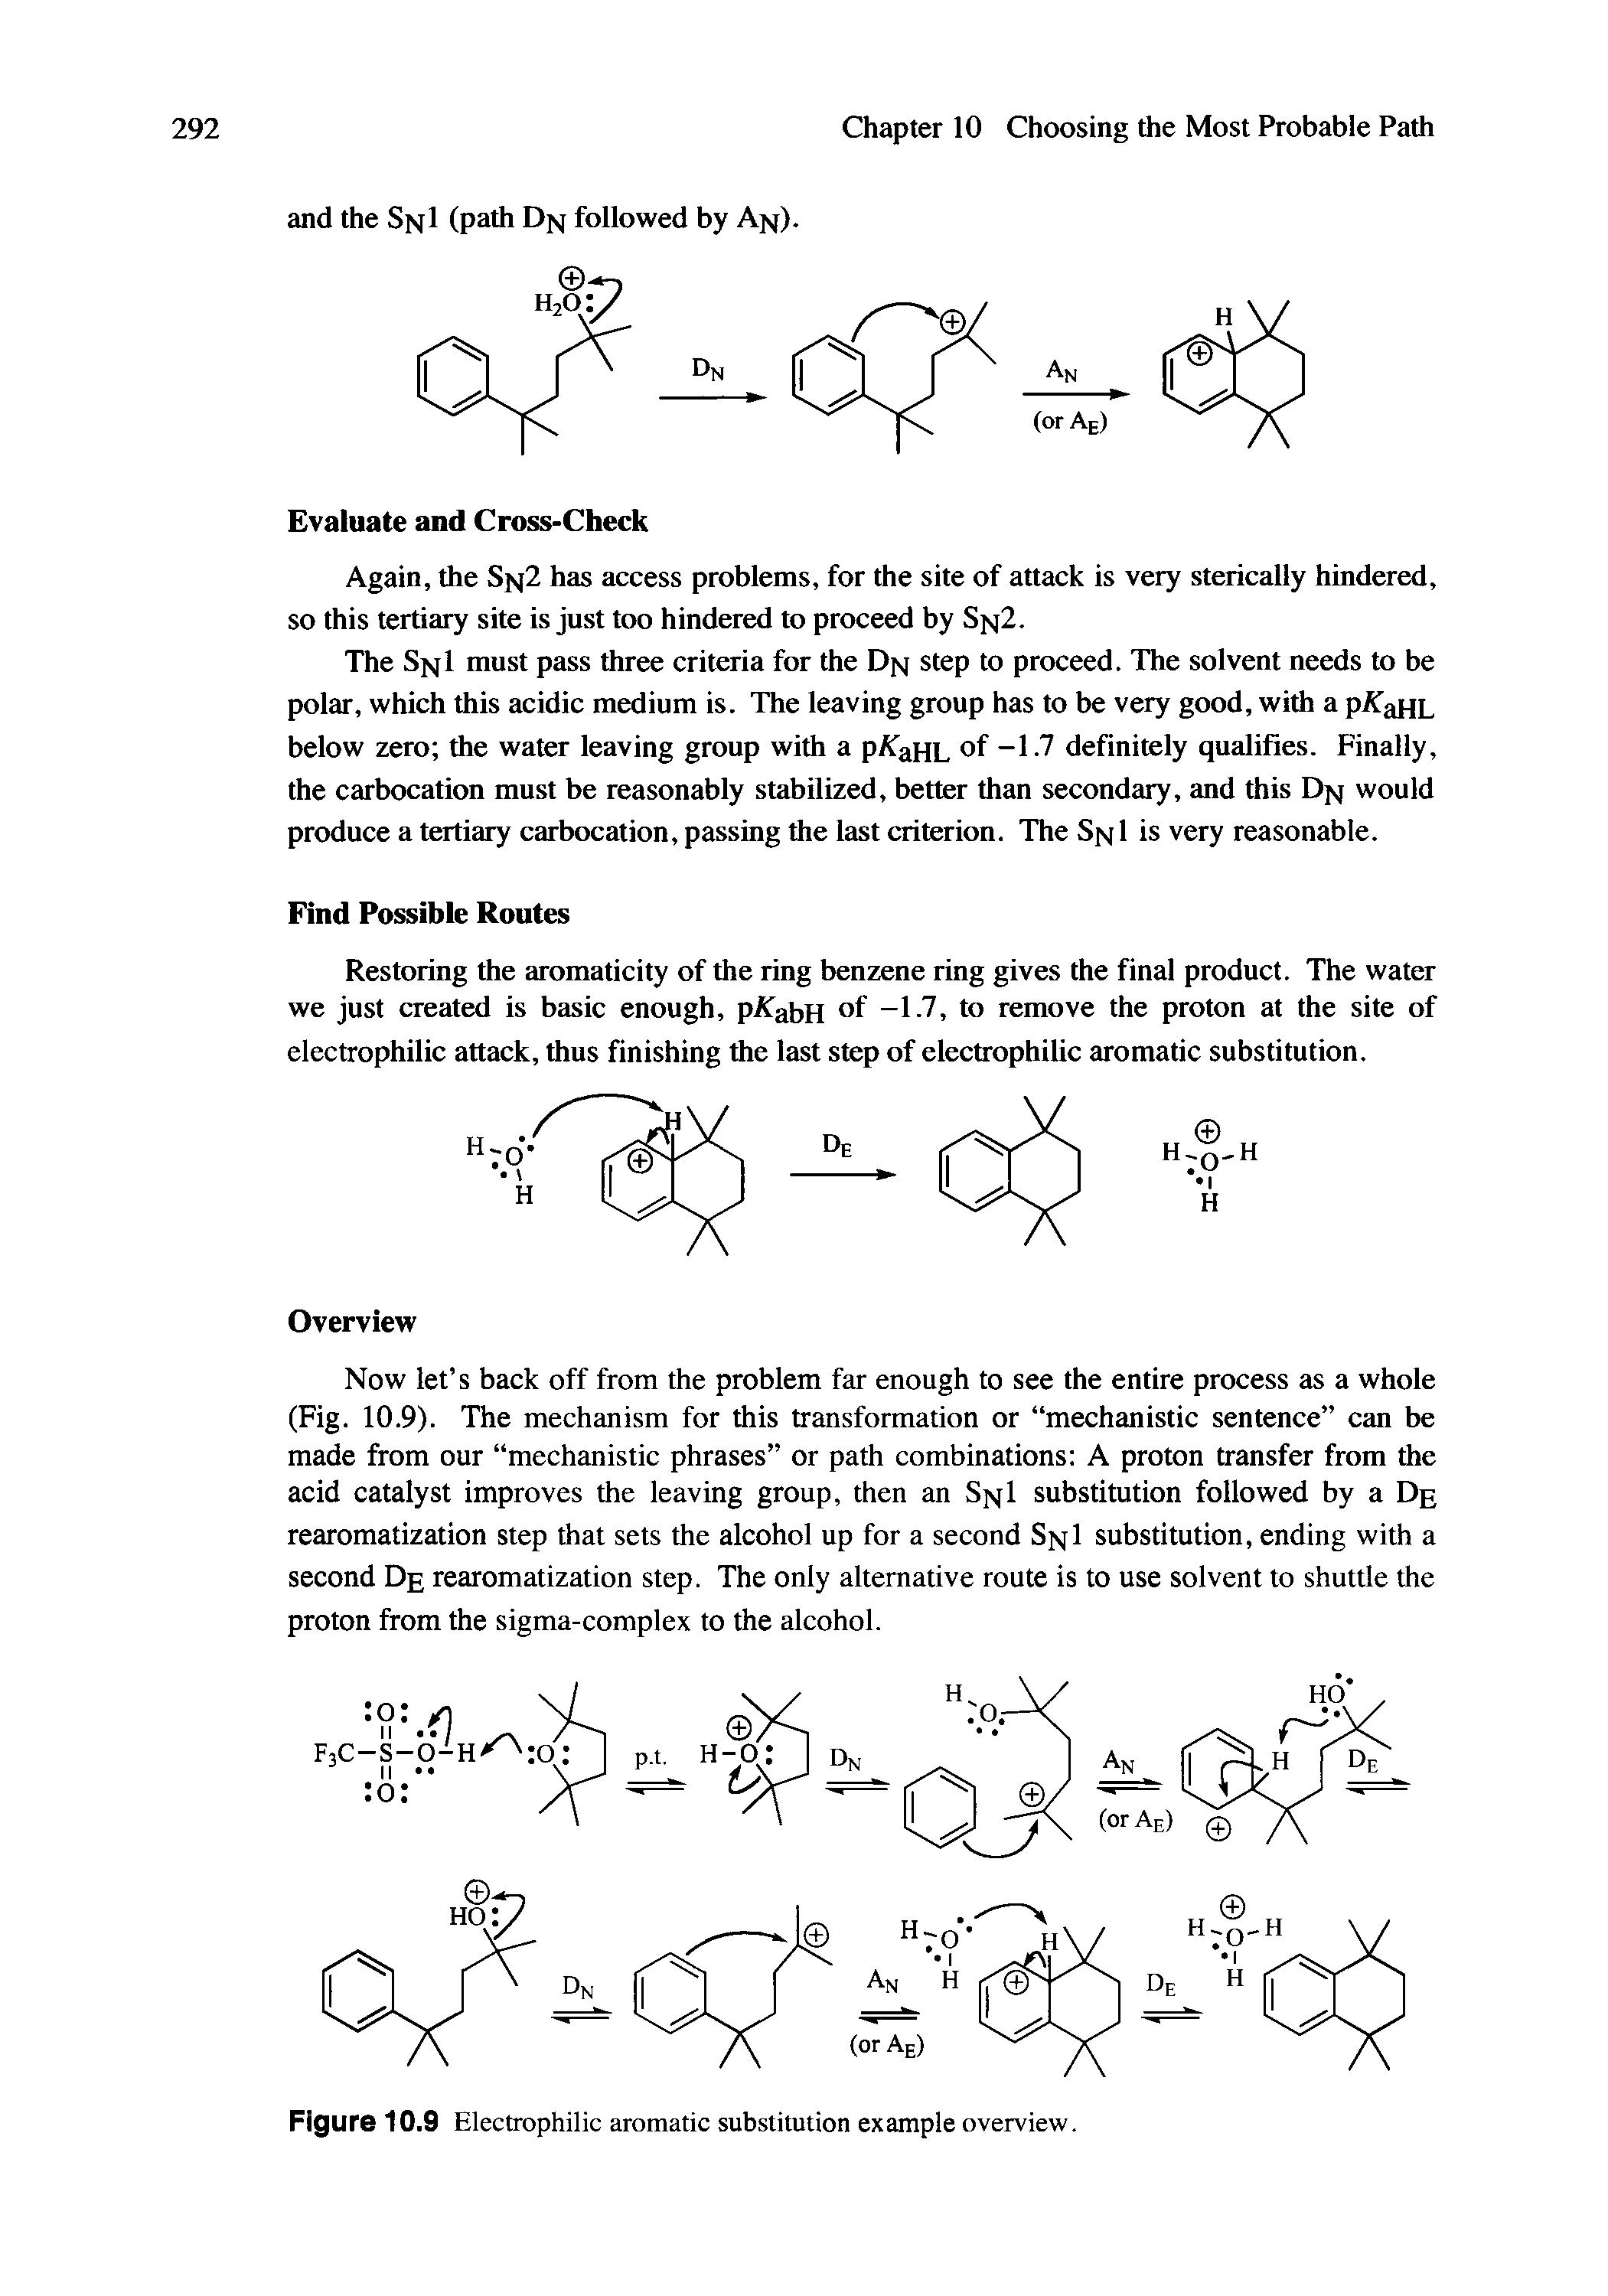 Figure 10.9 Electrophilic aromatic substitution example overview.